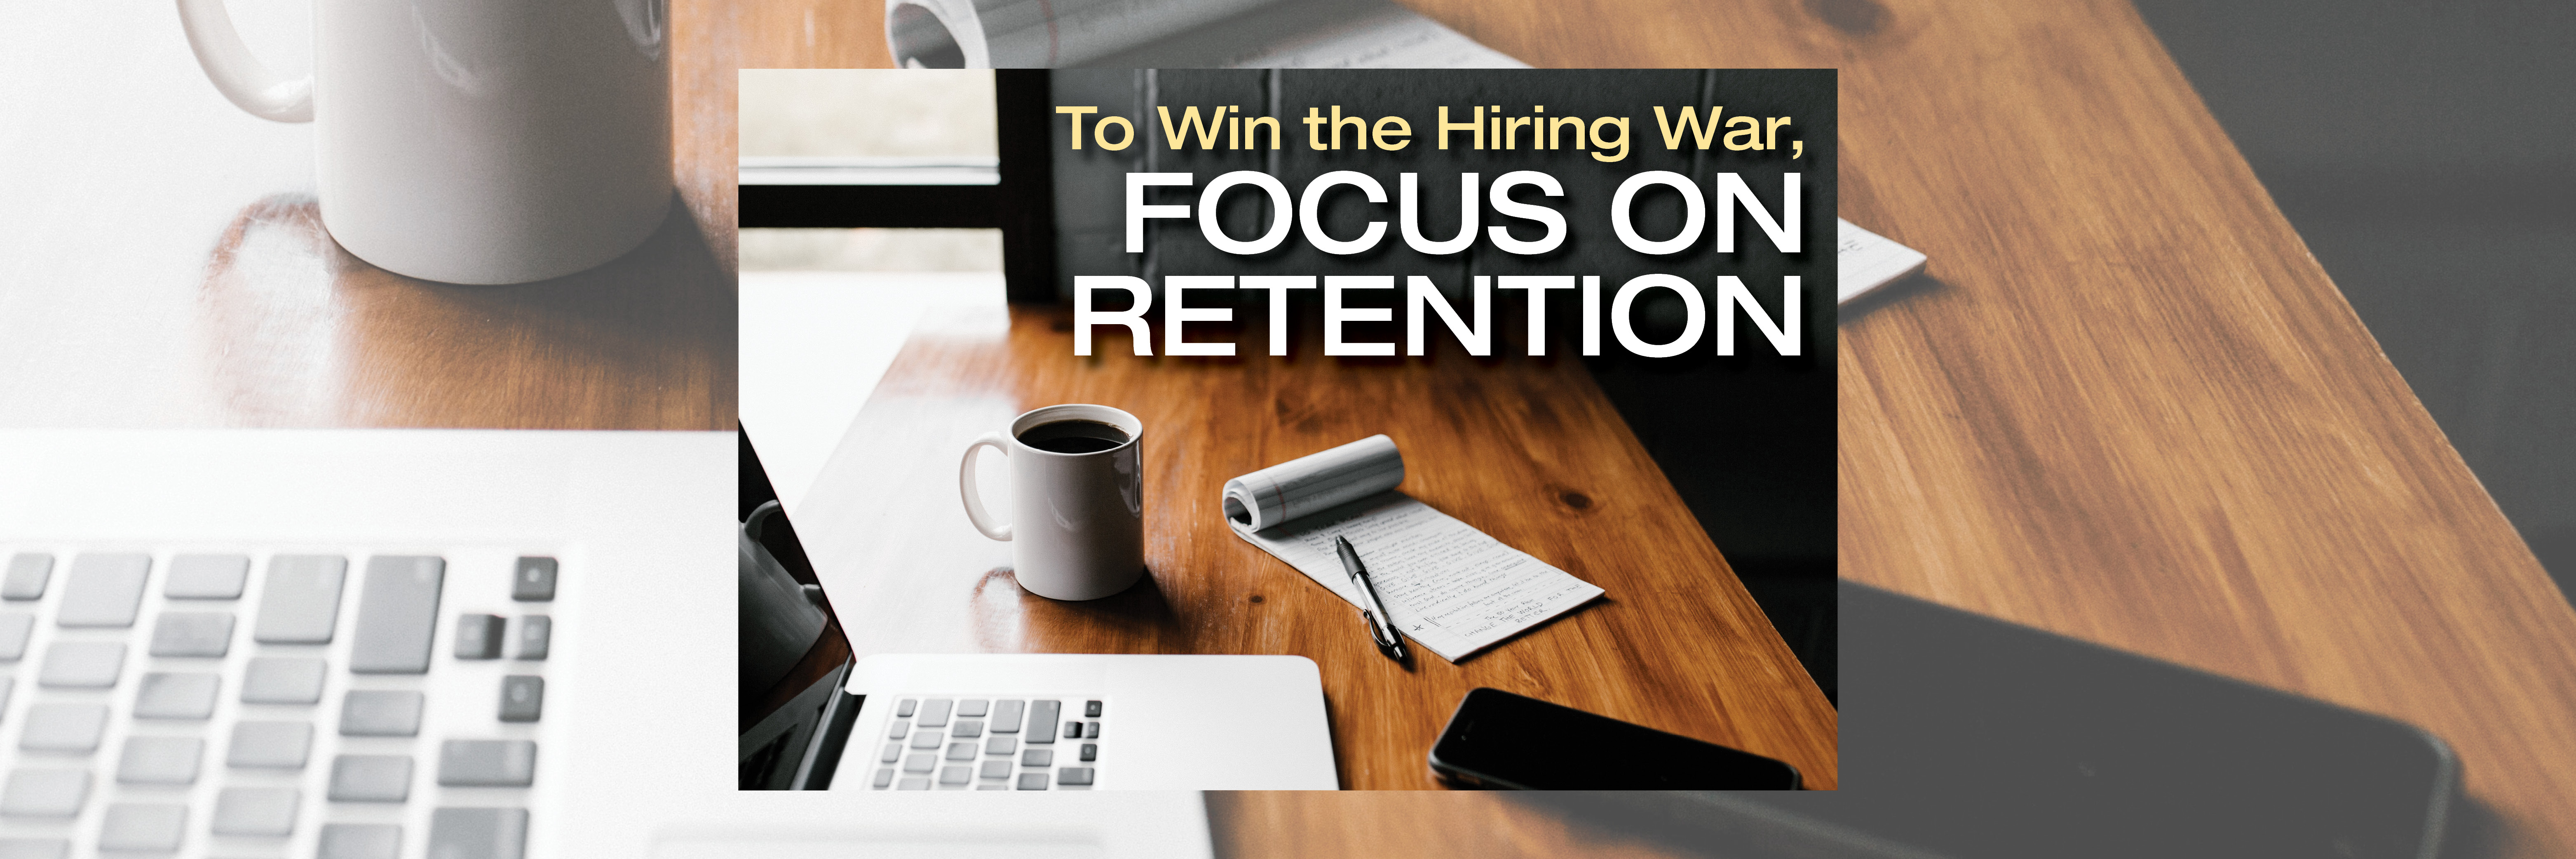 To Win the Hiring War, Focus on Retention